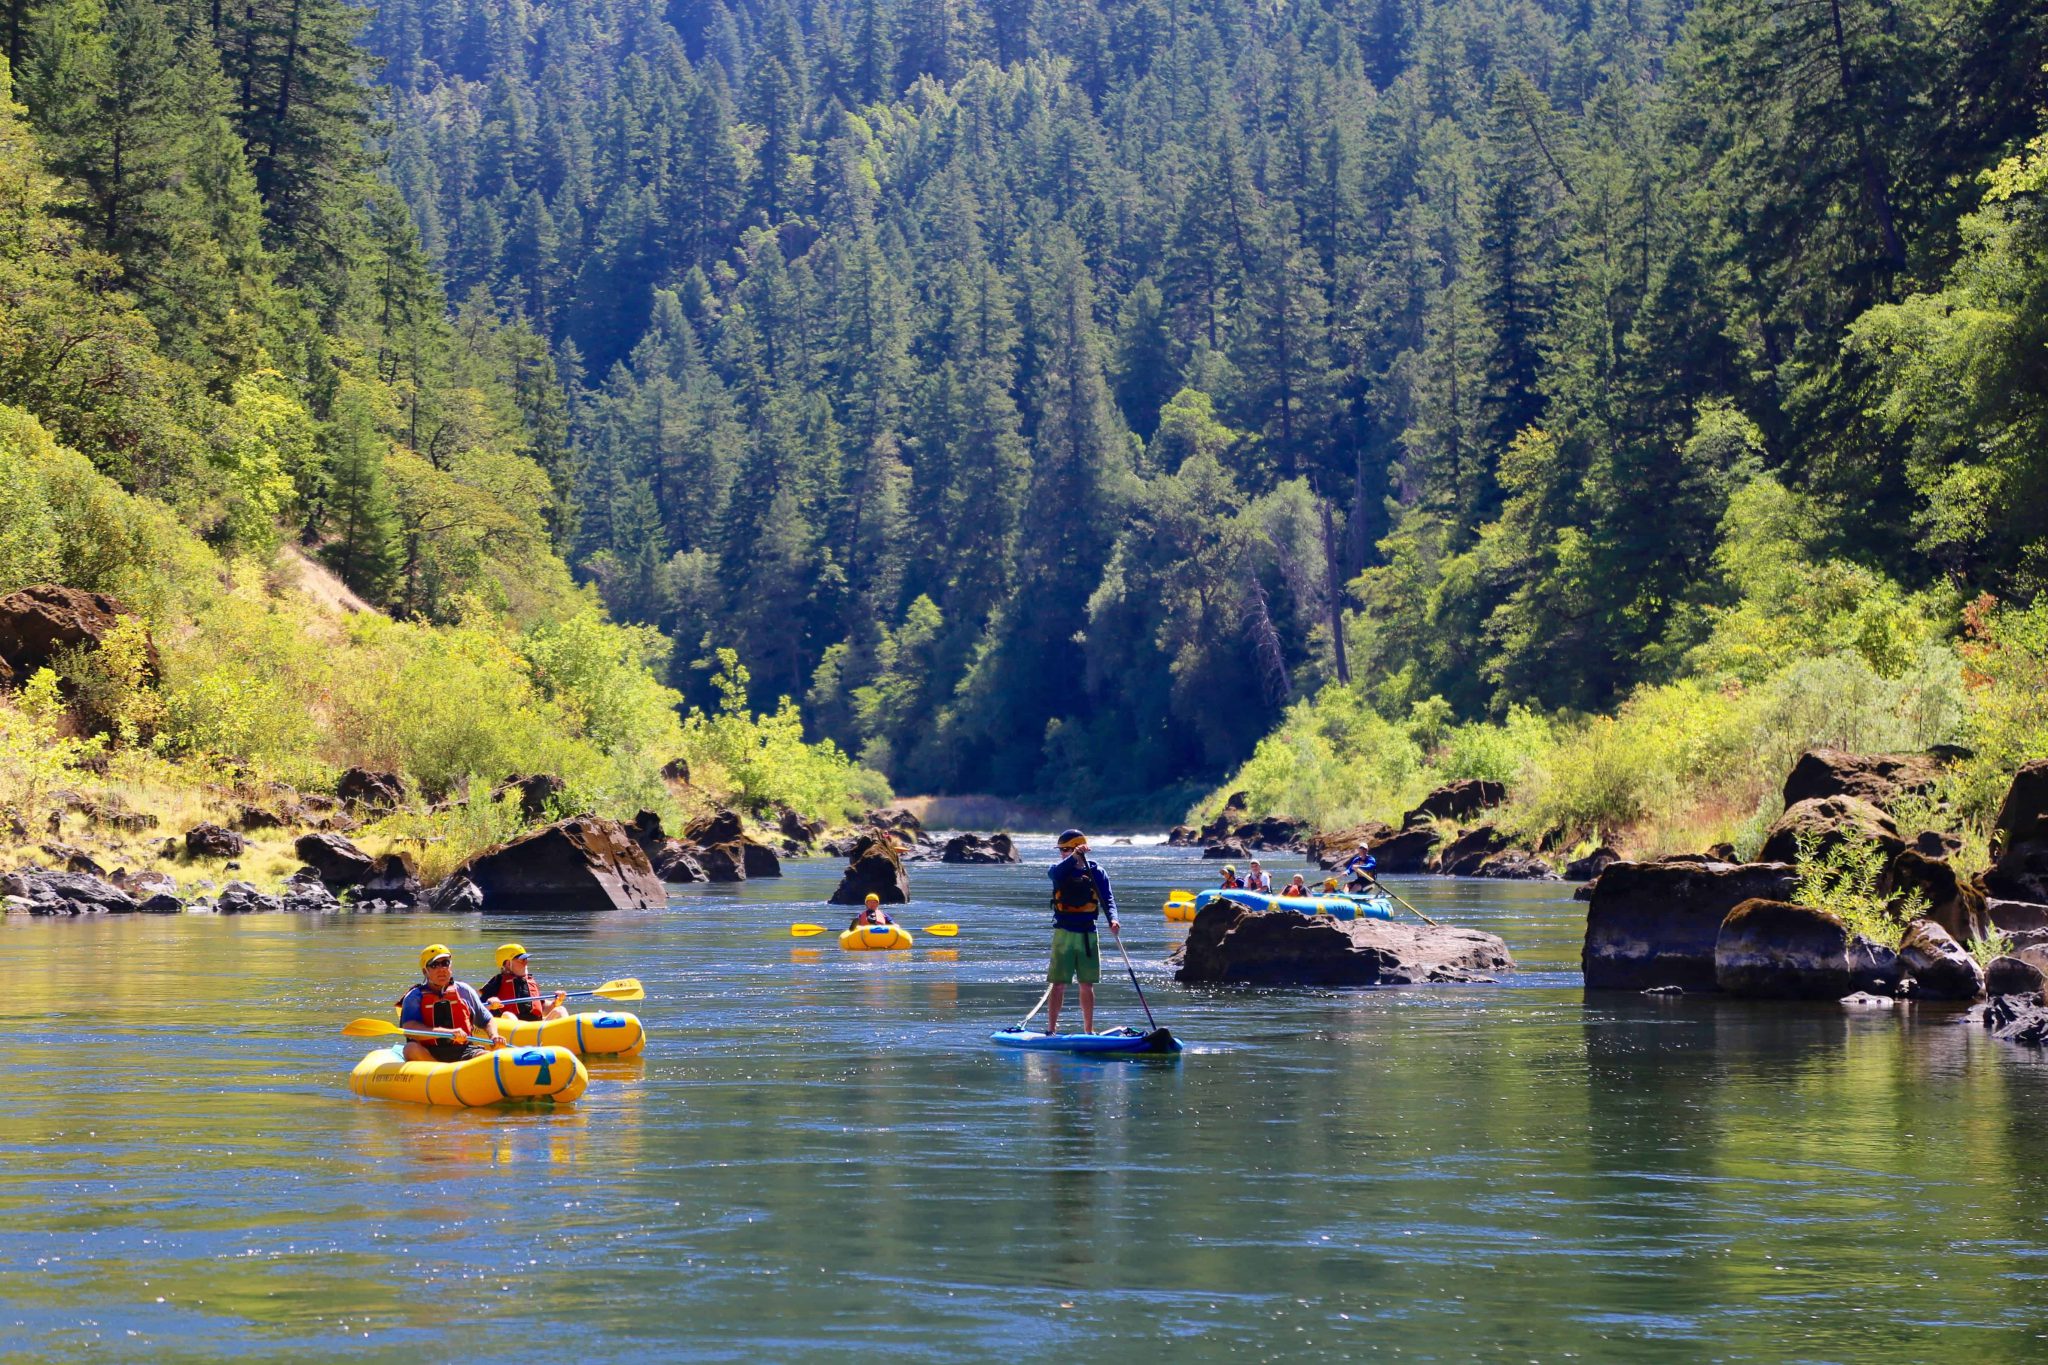 Protection of the Historic Rogue River Northwest Rafting Company